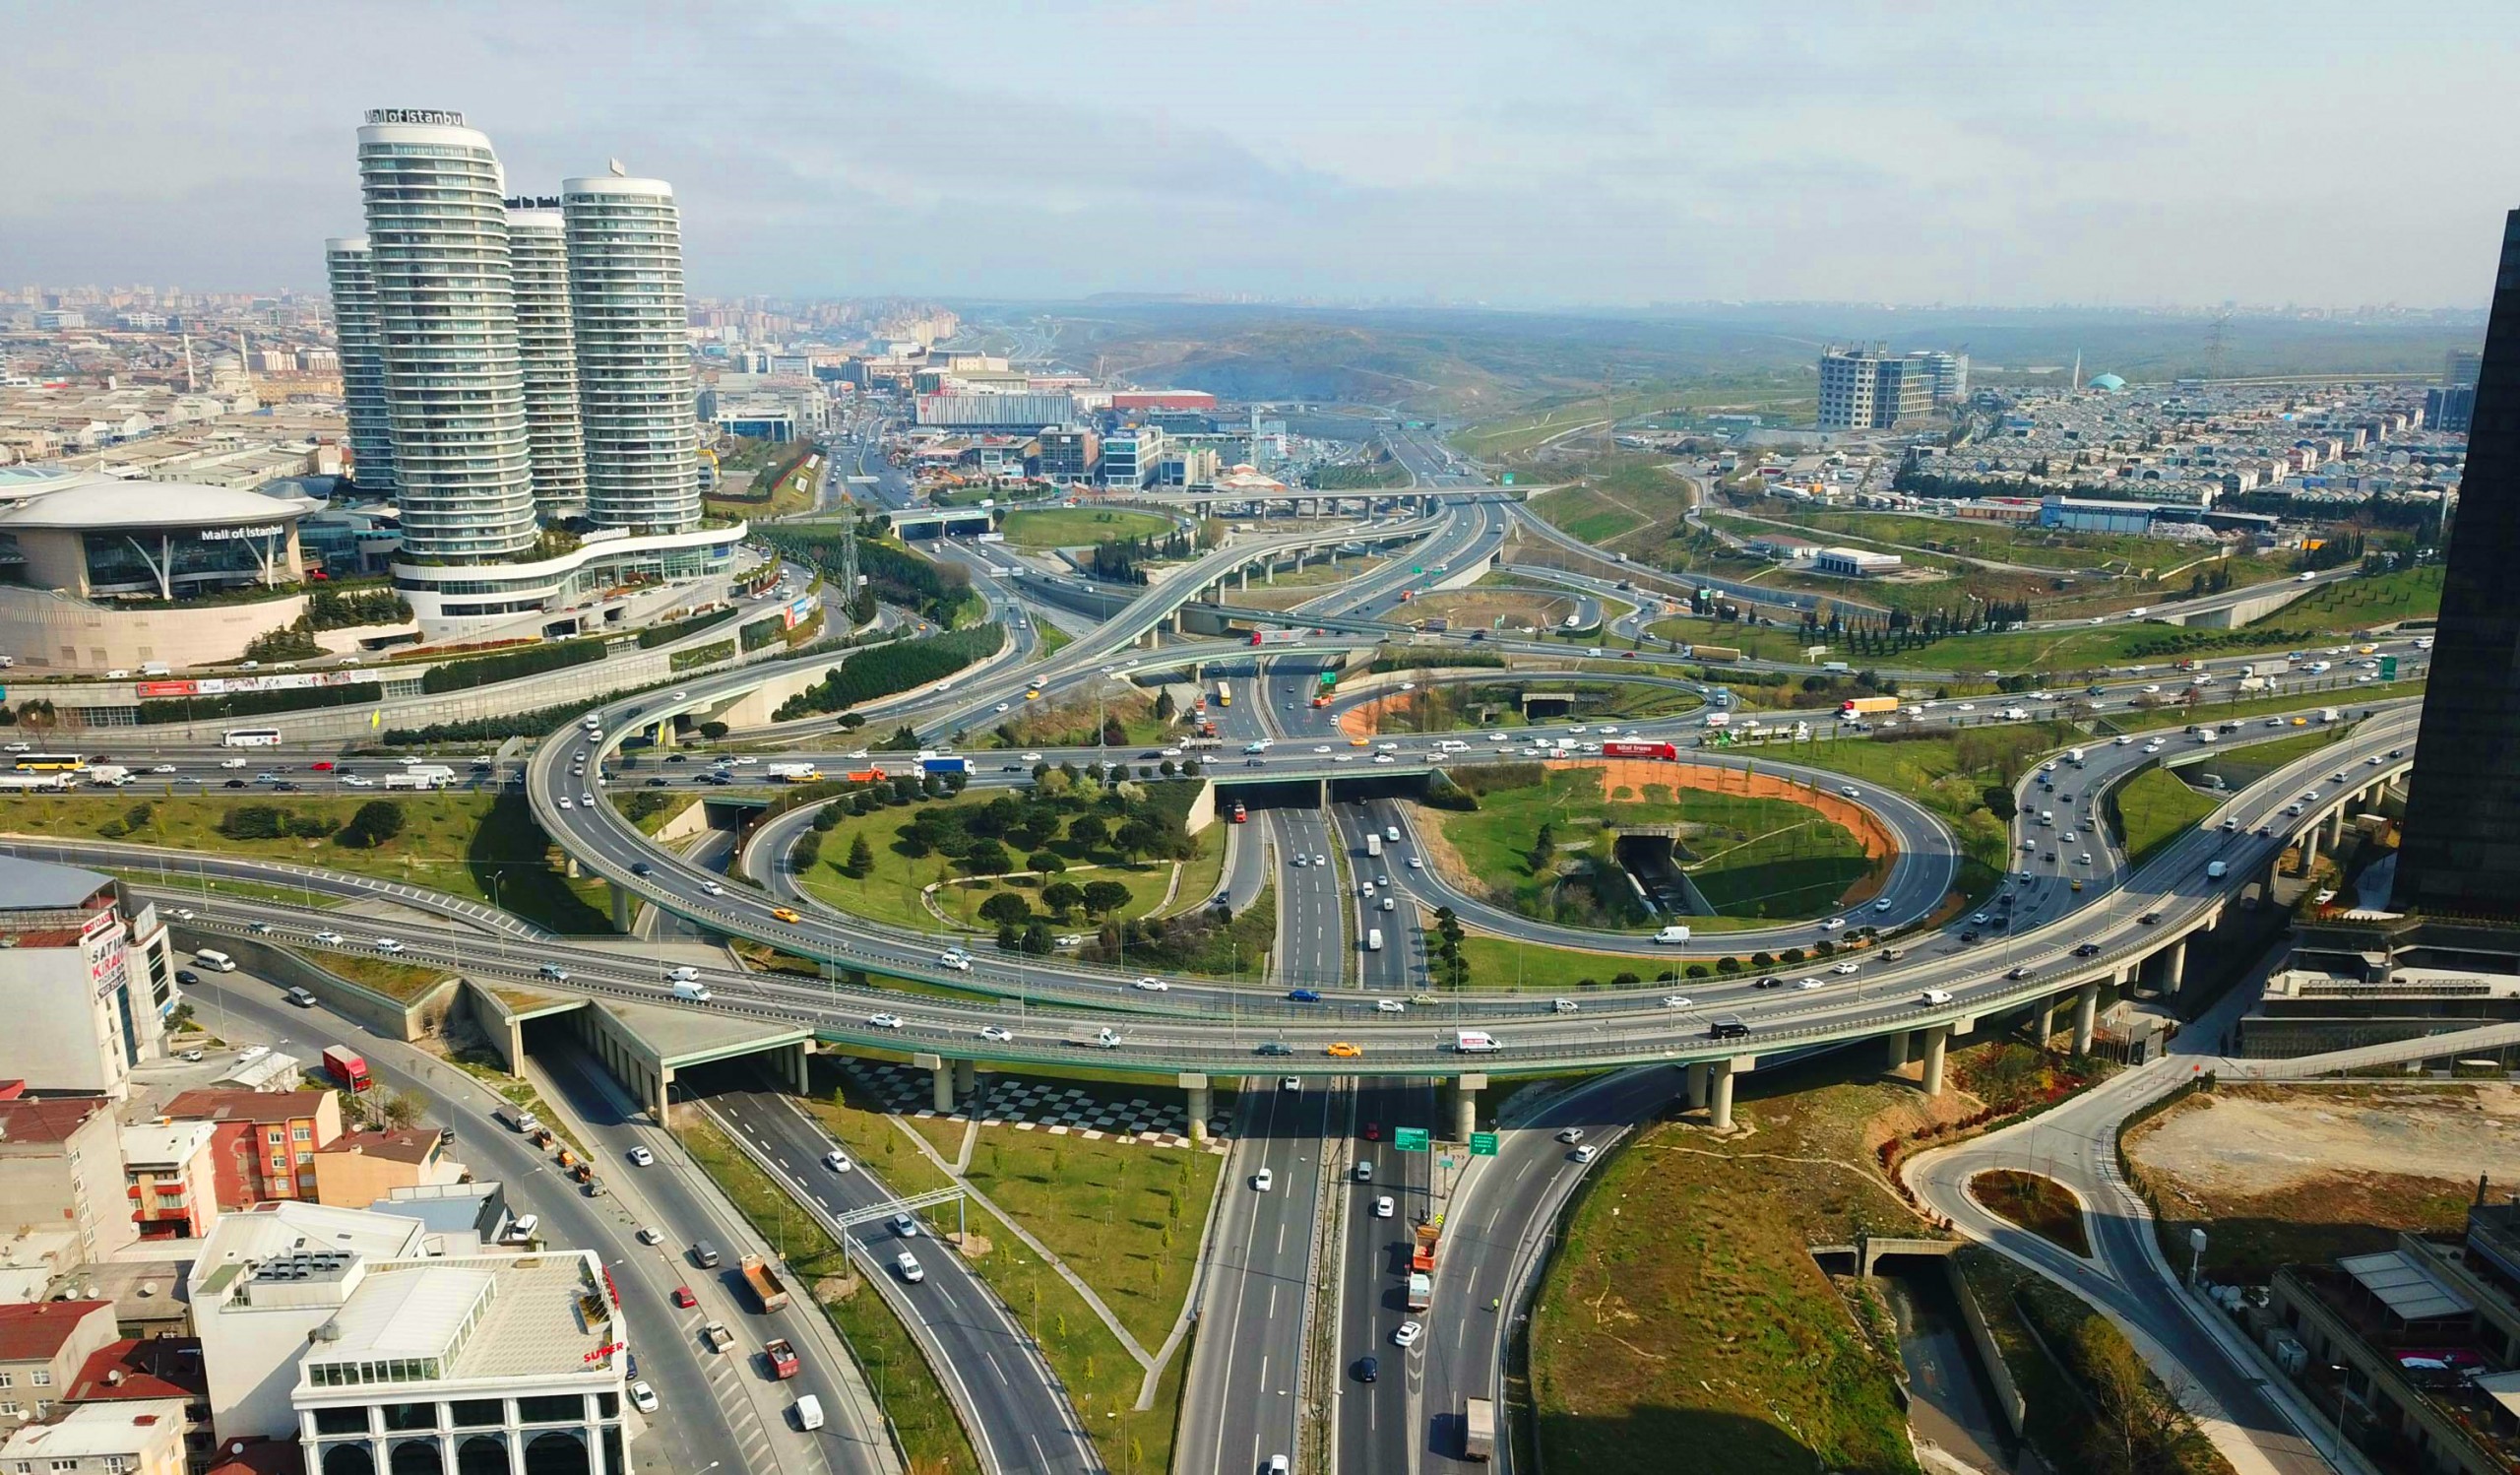 Basin Express – The New Investment Center of Istanbul